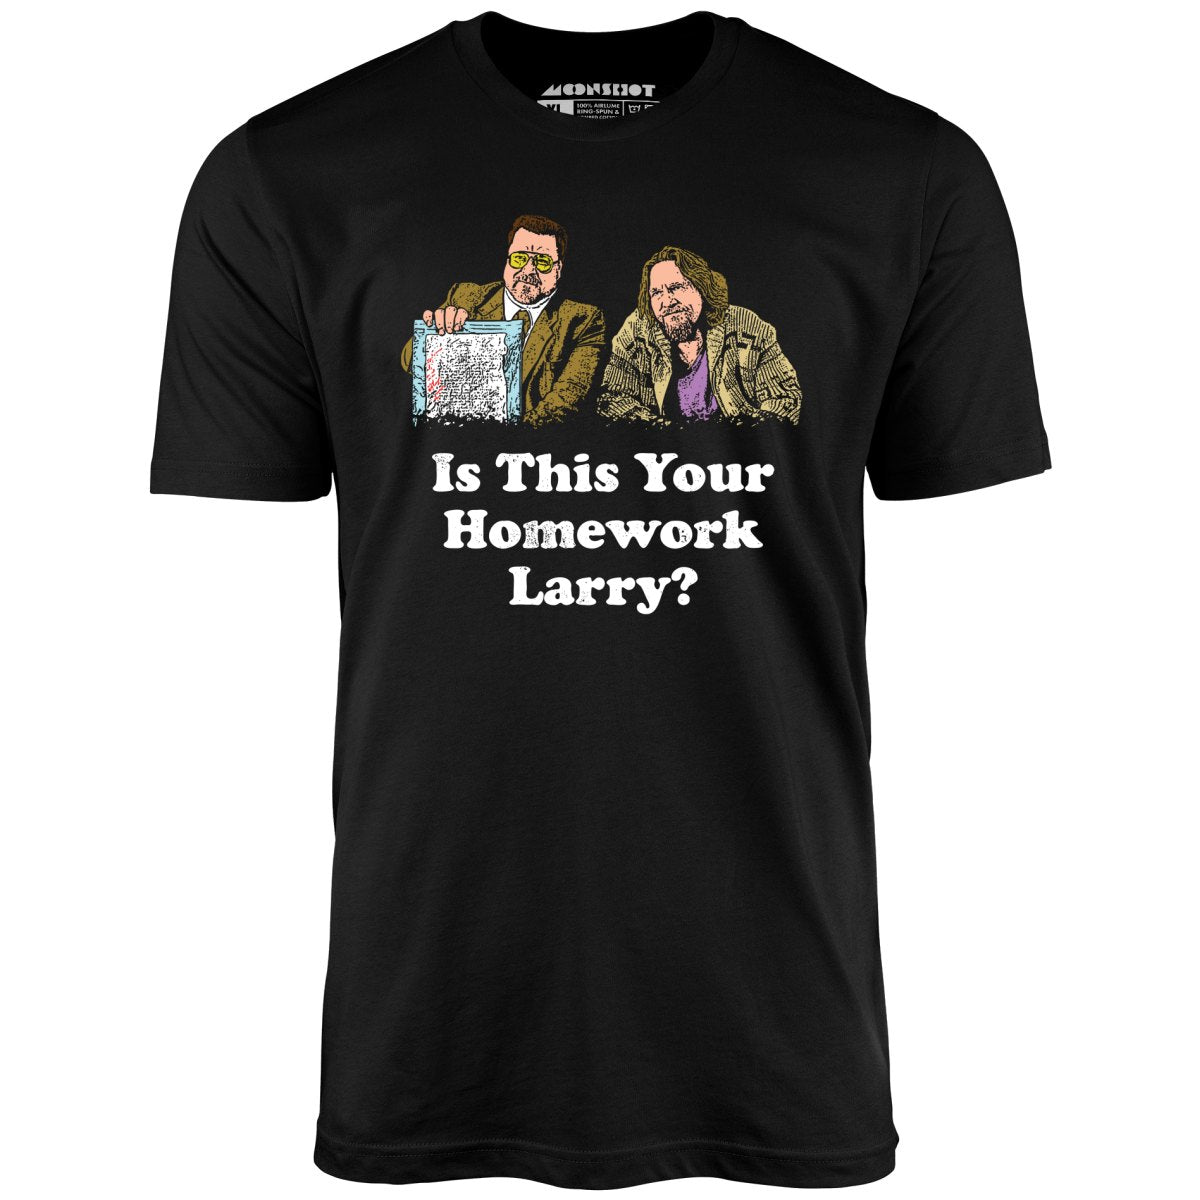 Is This Your Homework, Larry? - Unisex T-Shirt